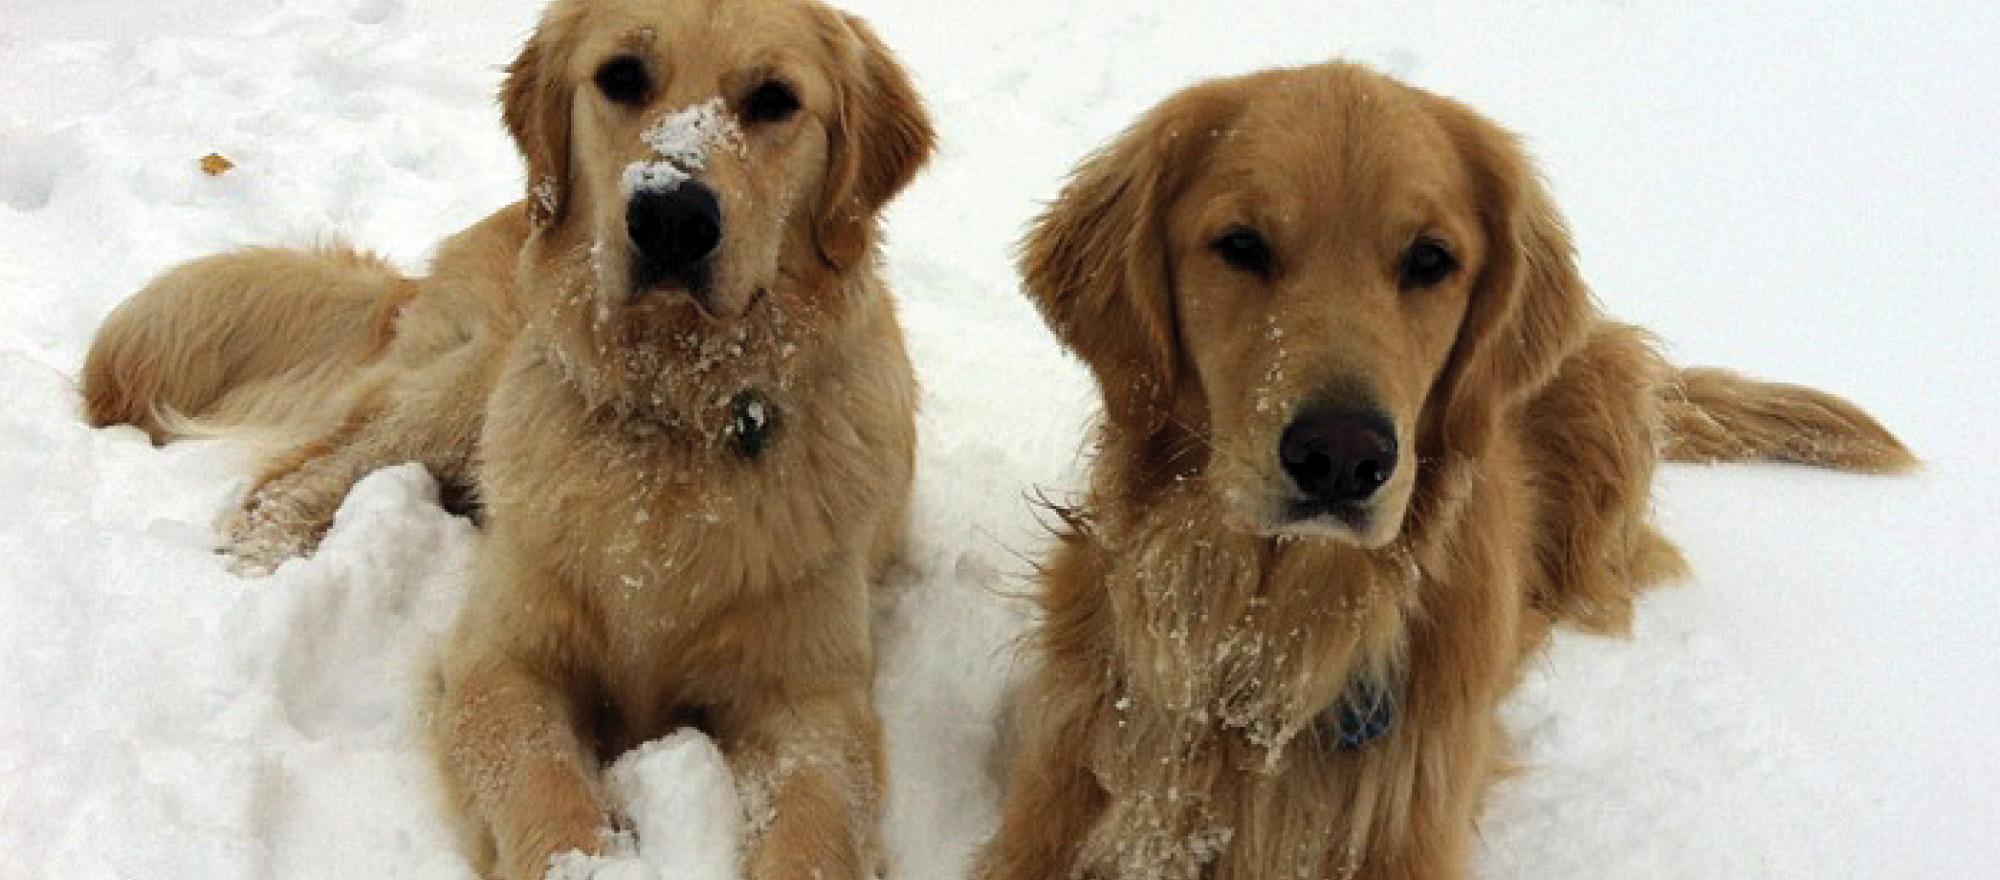 Miles and Louie Mesinger of Mesinger Jet Sales are both participating in the MAF Golden Retriever Lifetime Study.